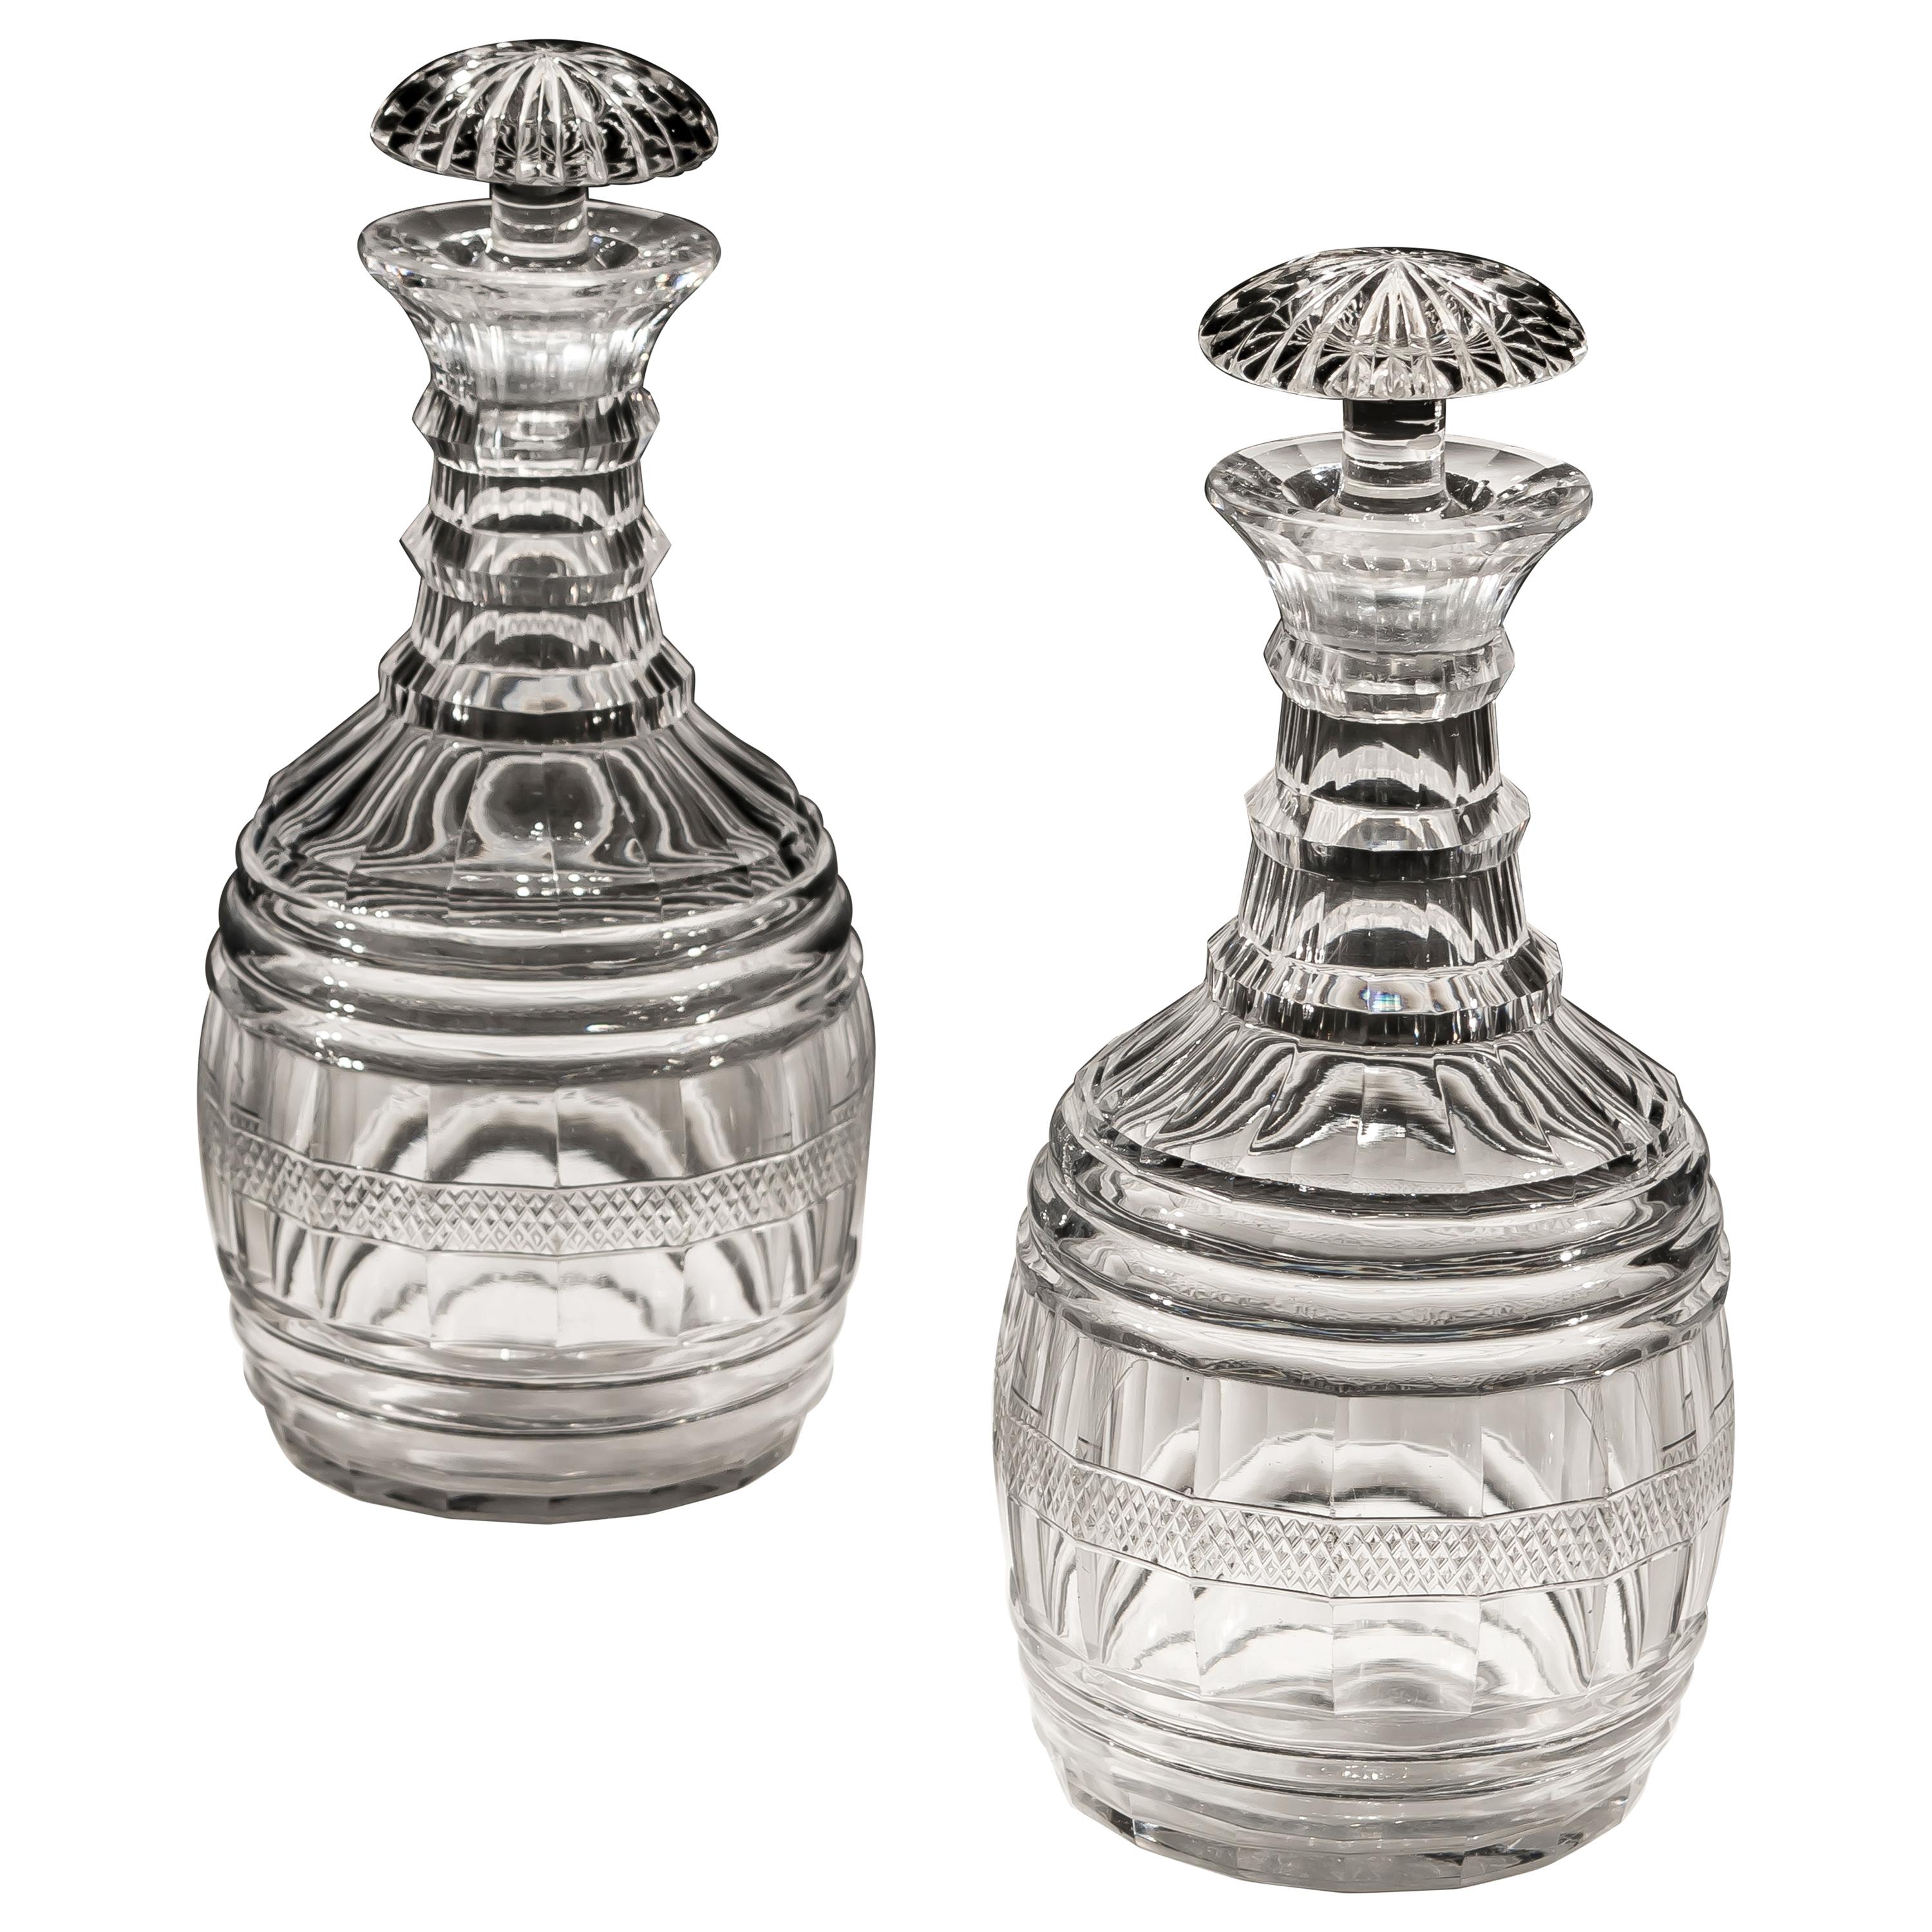 Pair of Regency Cut Glass Barrel Decanters For Sale